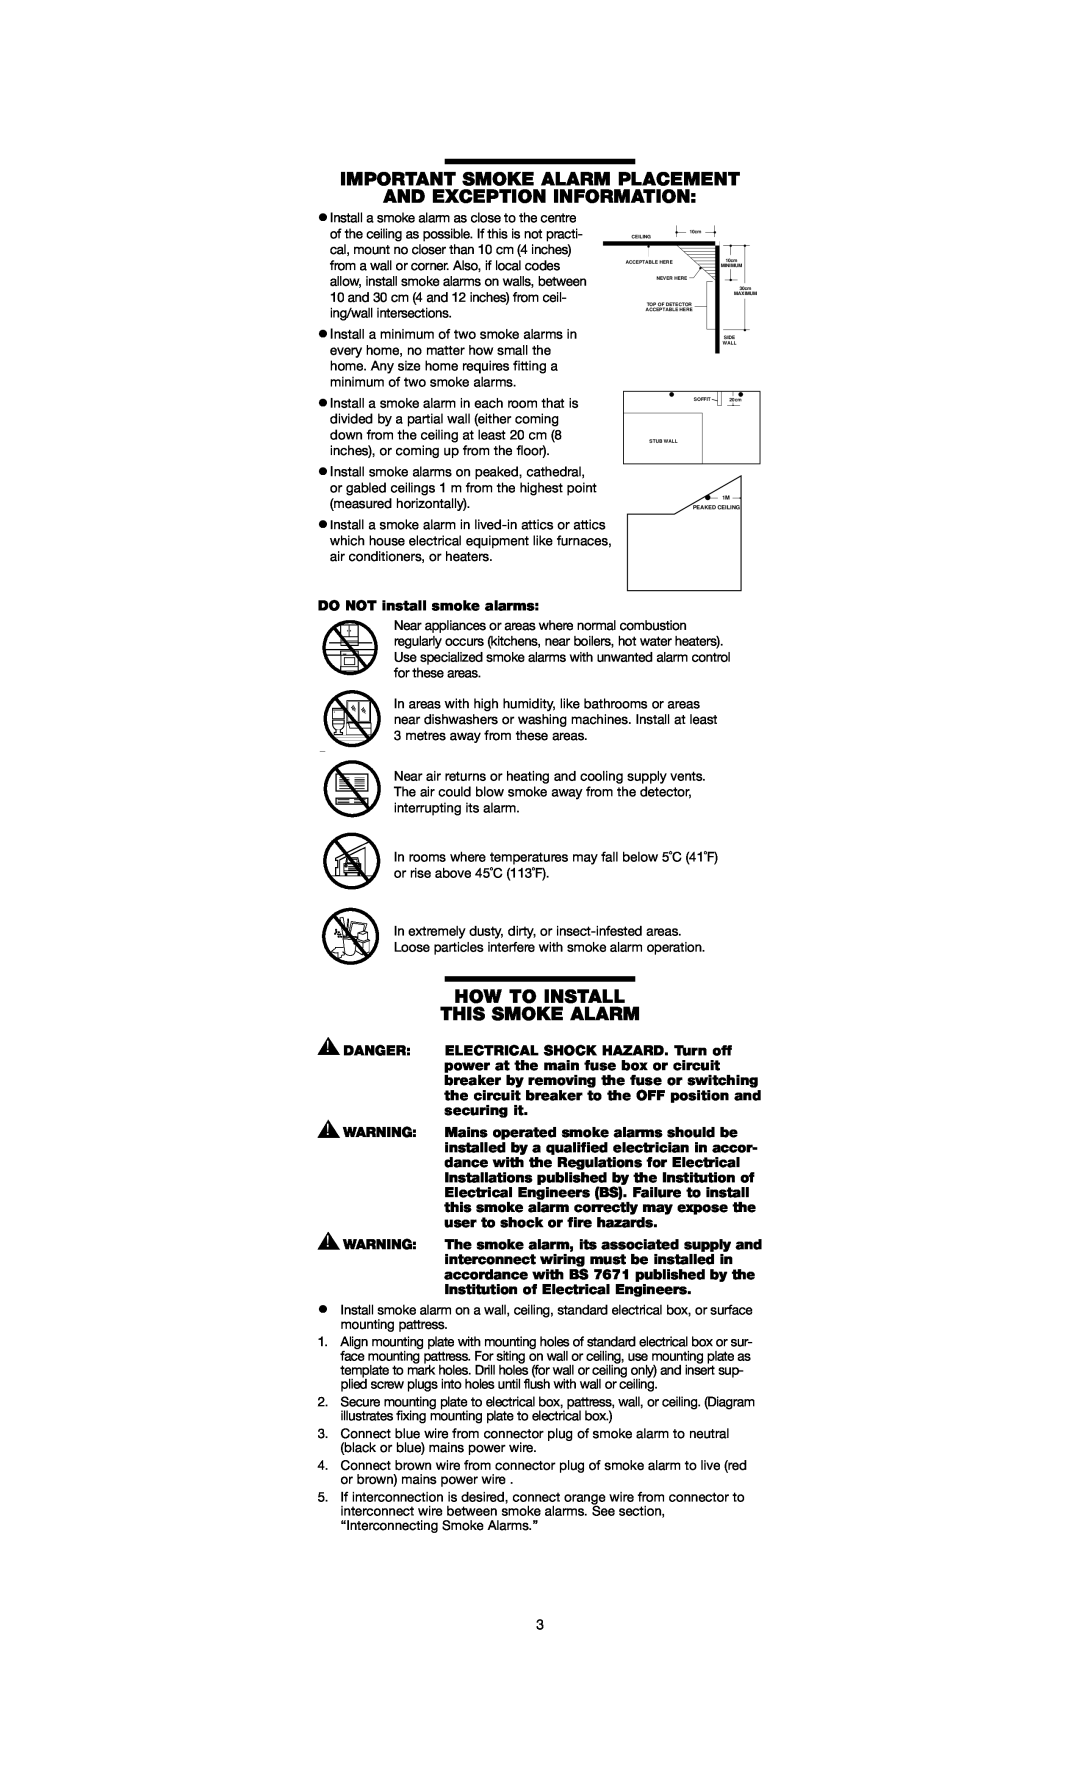 Firex PAD240, PG240 Important Smoke Alarm Placement And Exception Information, How To Install, This Smoke Alarm, Danger 